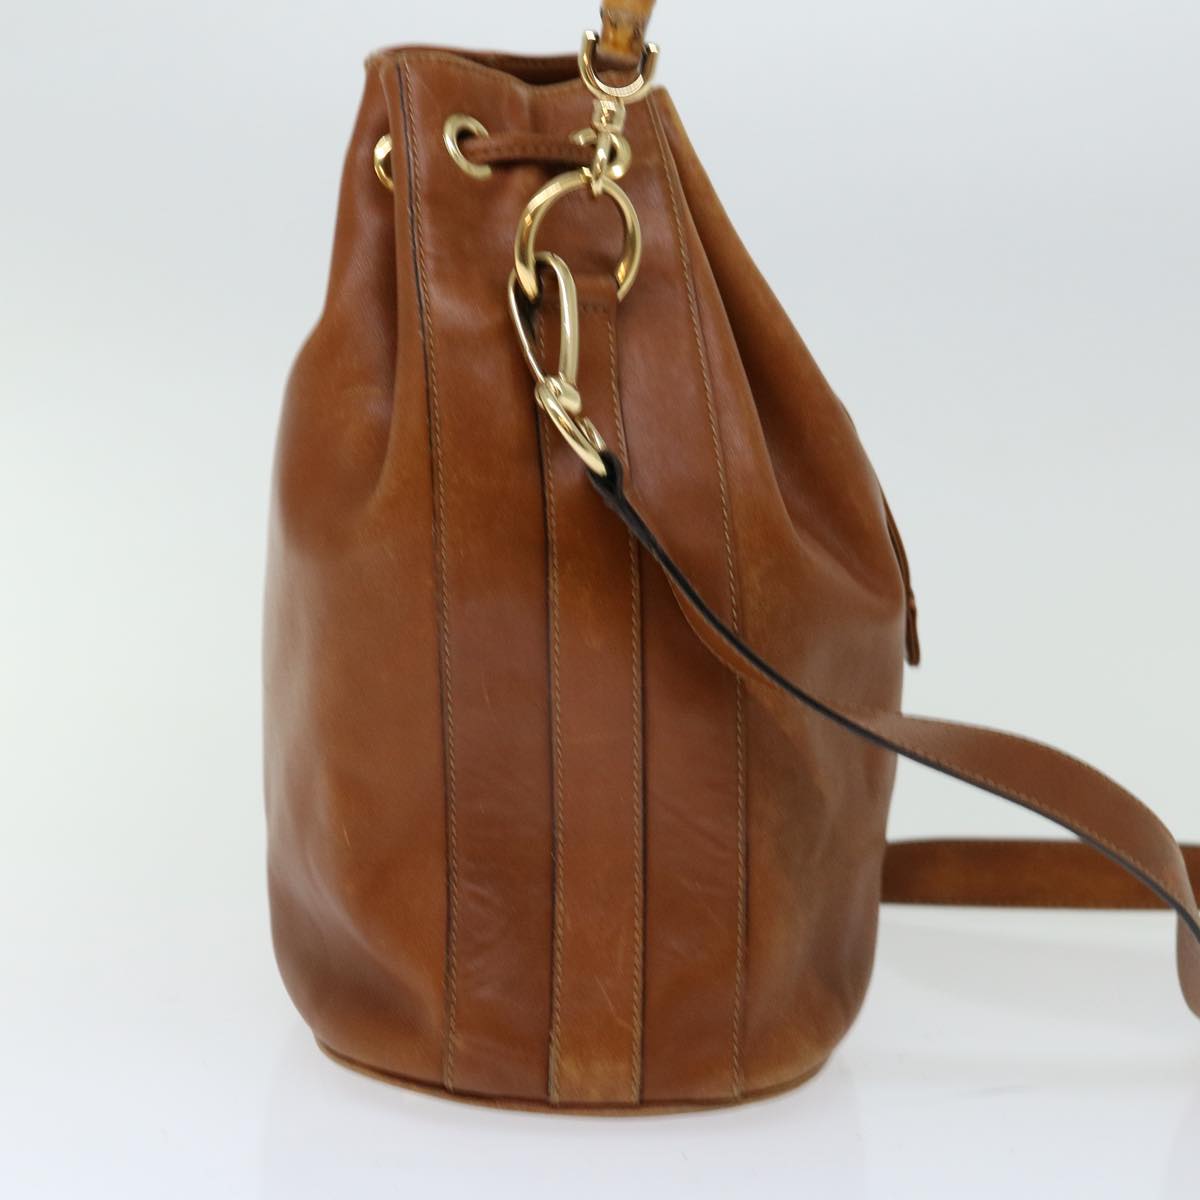 GUCCI Bamboo Shoulder Bag Leather 2way Brown Auth 70147